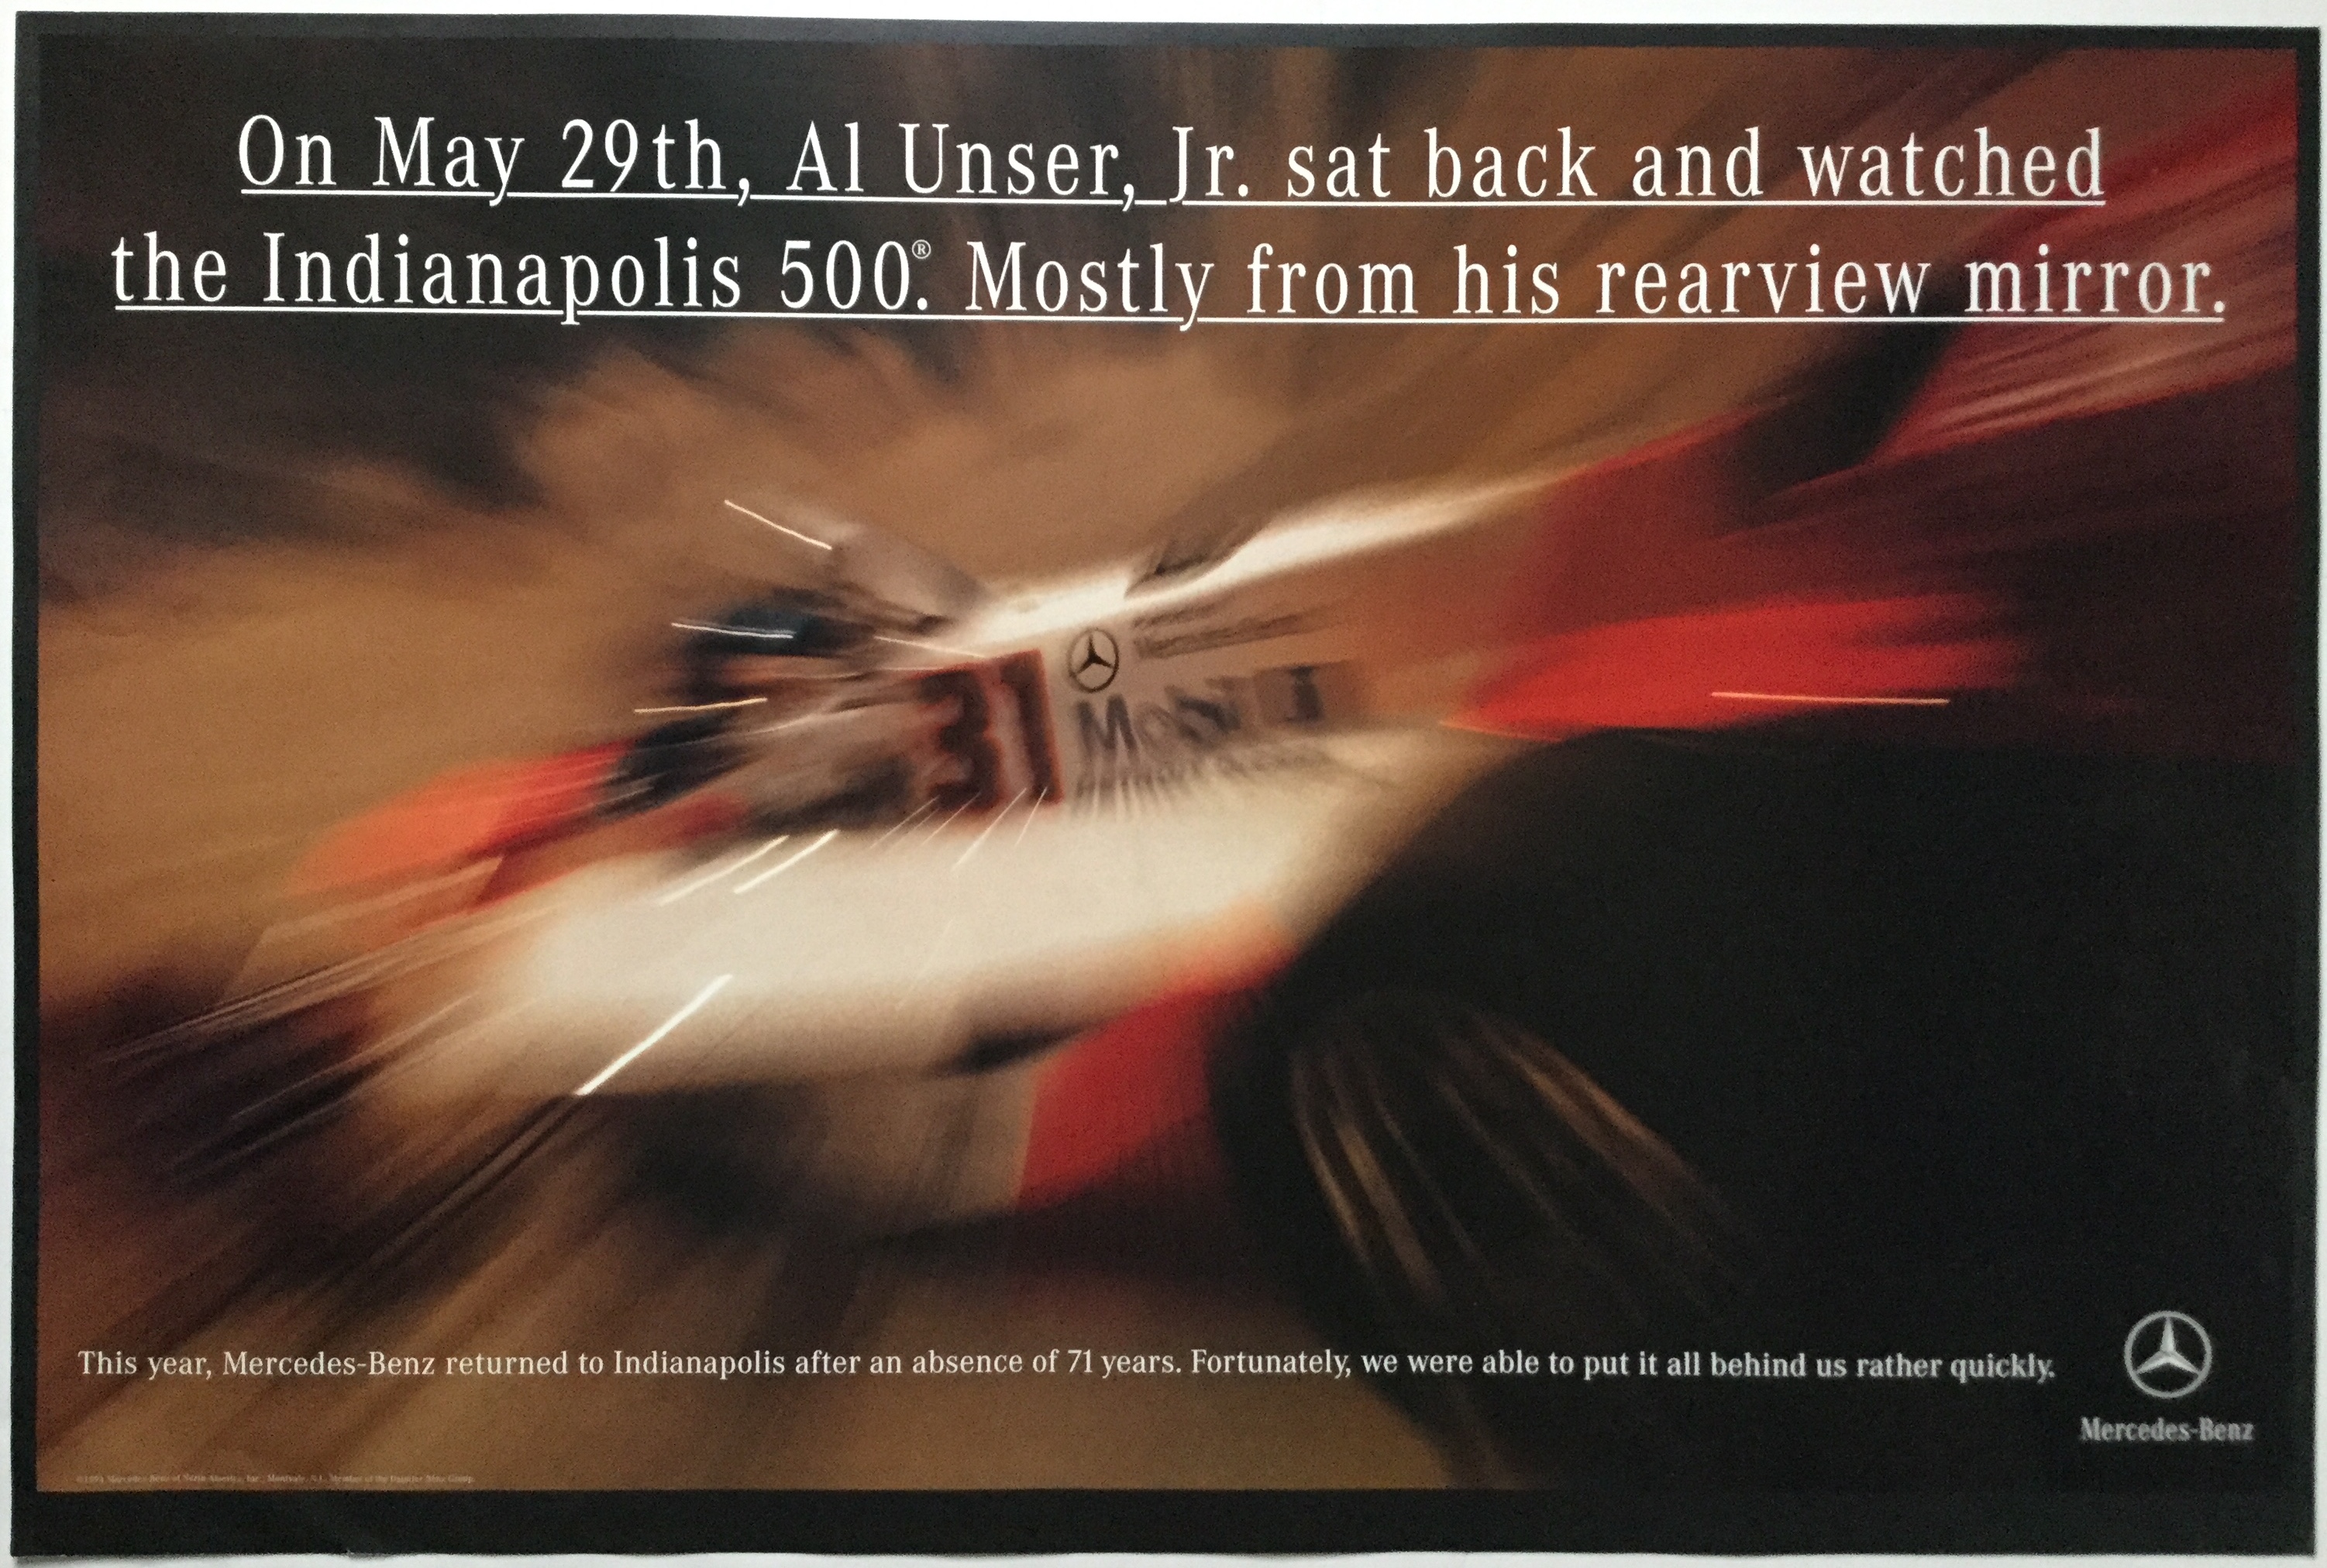 J494	ON MAY 29TH, AL, UNDER, JR. SAT BACK AND WATCHED THE INDIANAPOLIS 500. MOSTLY FROM HIS REARVIEW MIRROR.